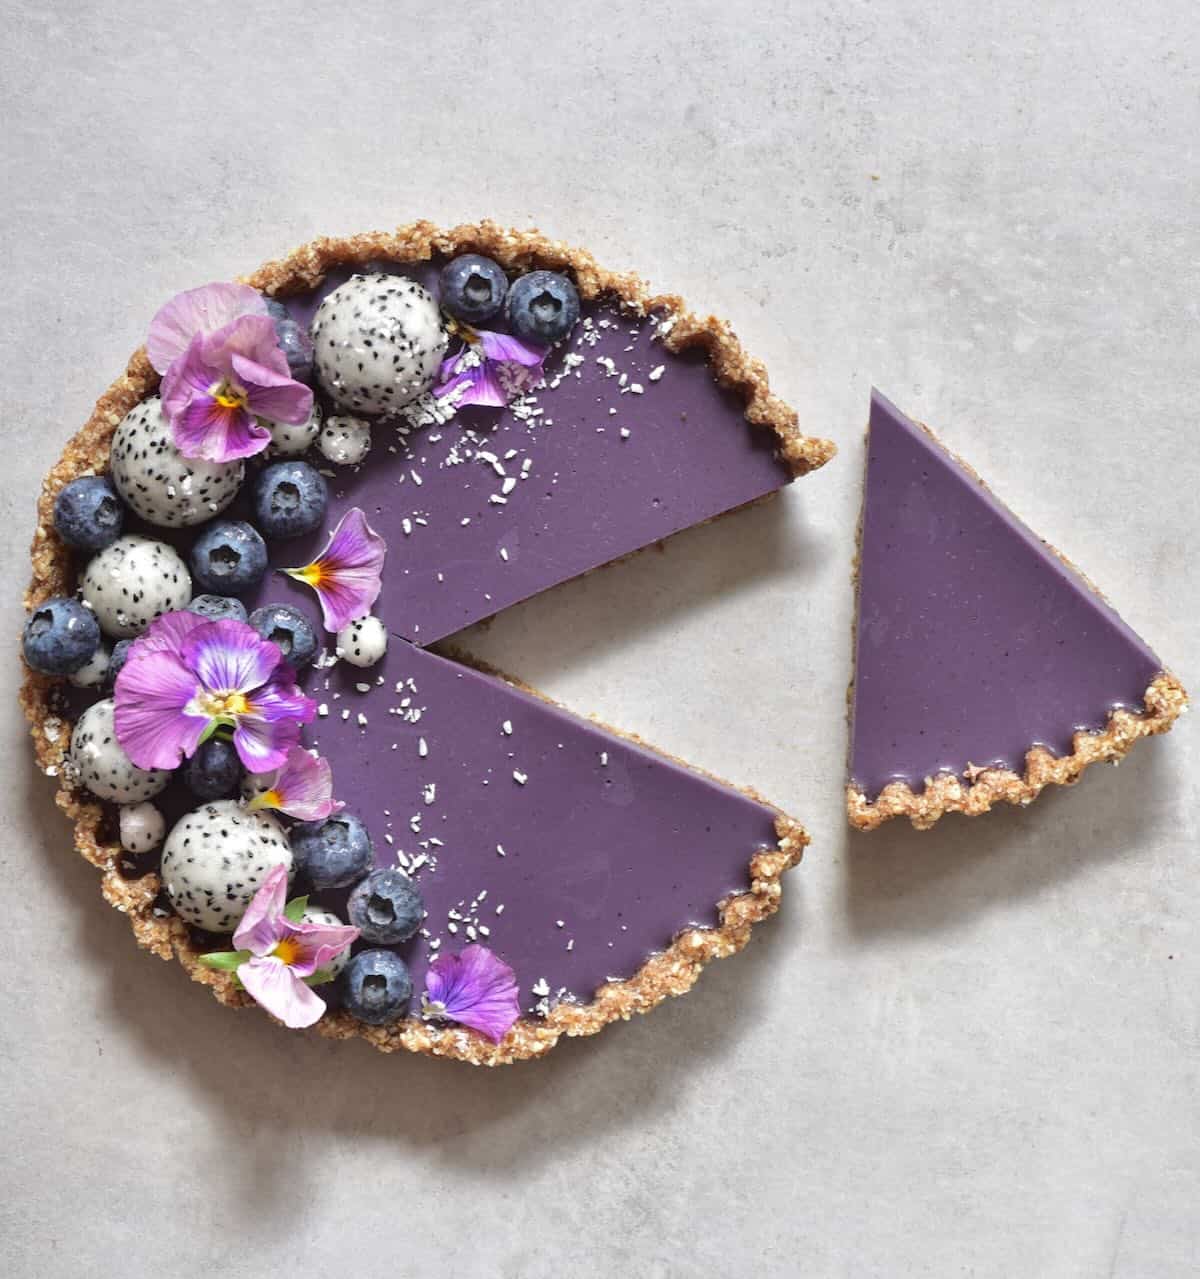 A no bake blueberry tart with a slice cut off